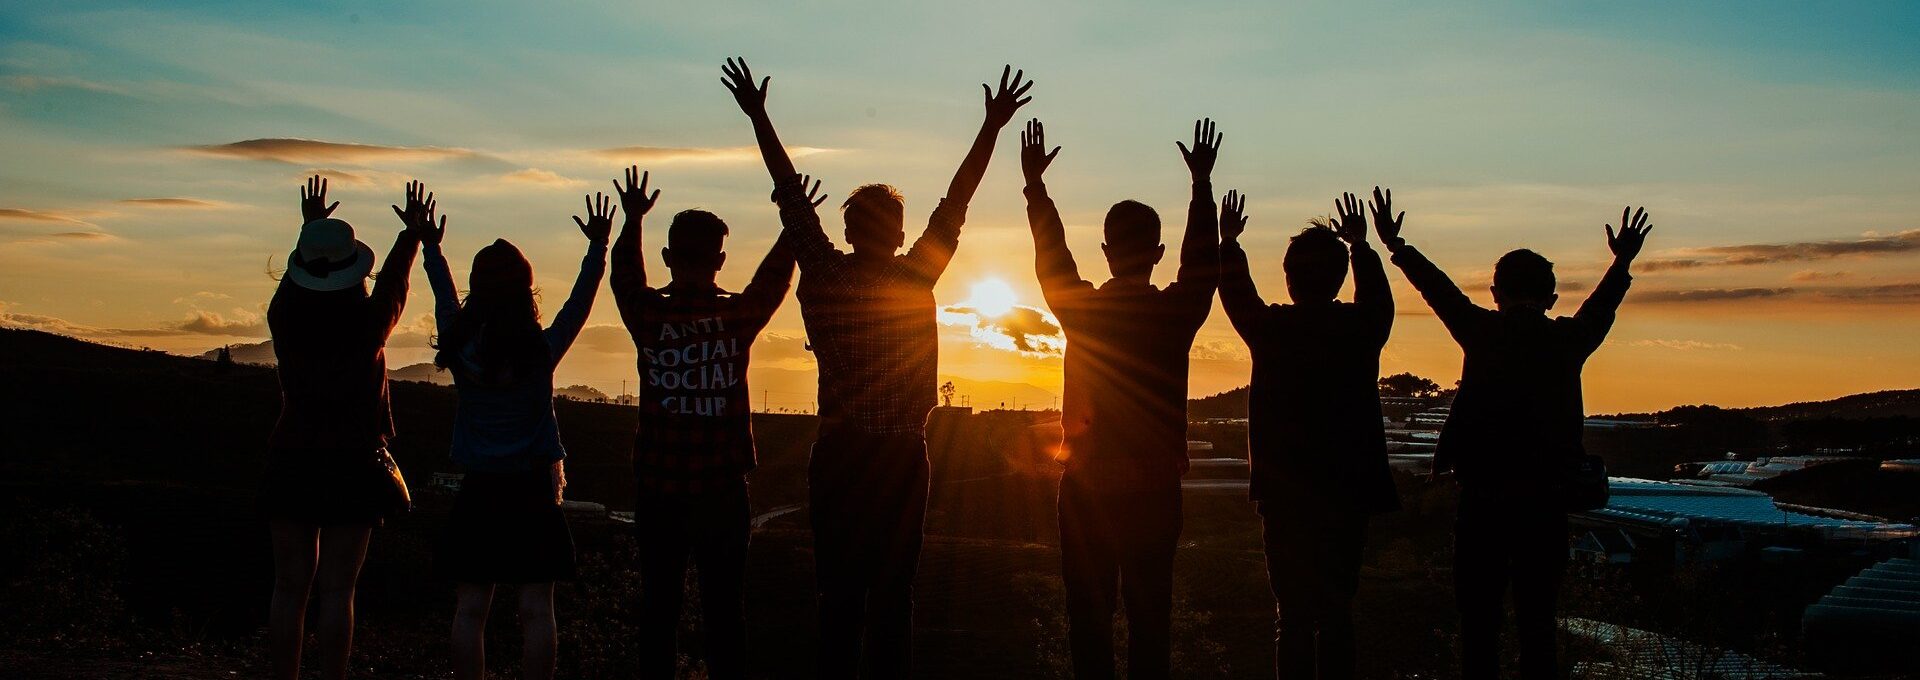 People om front of sunset with hands in the air